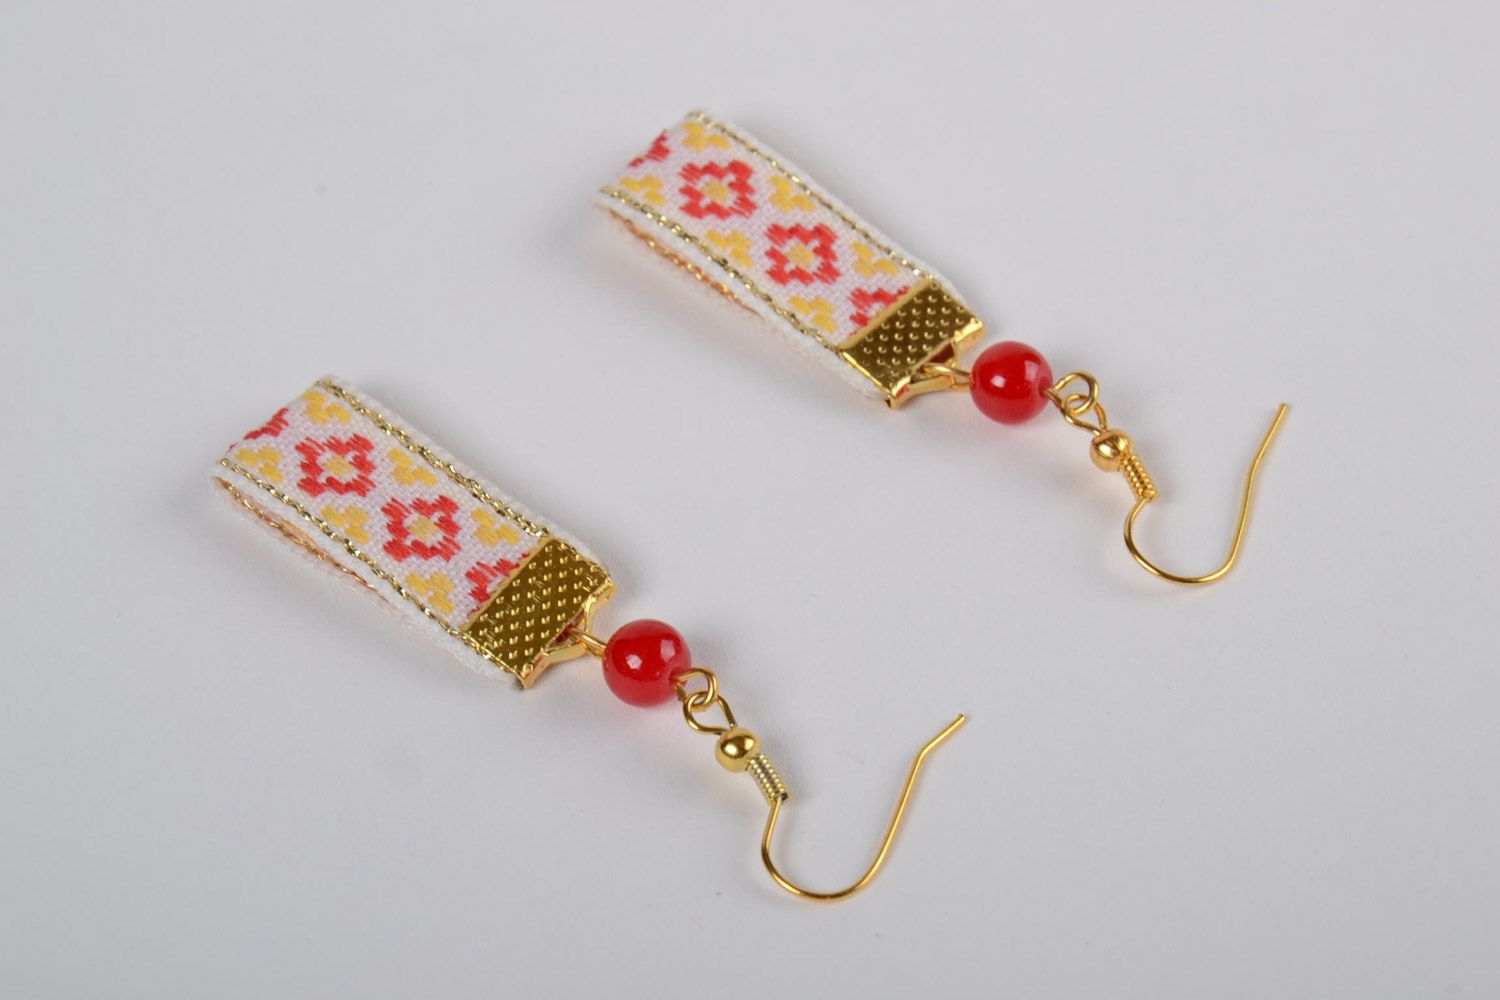 Handmade earrings with charms in ethnic style with bright beads for women photo 2